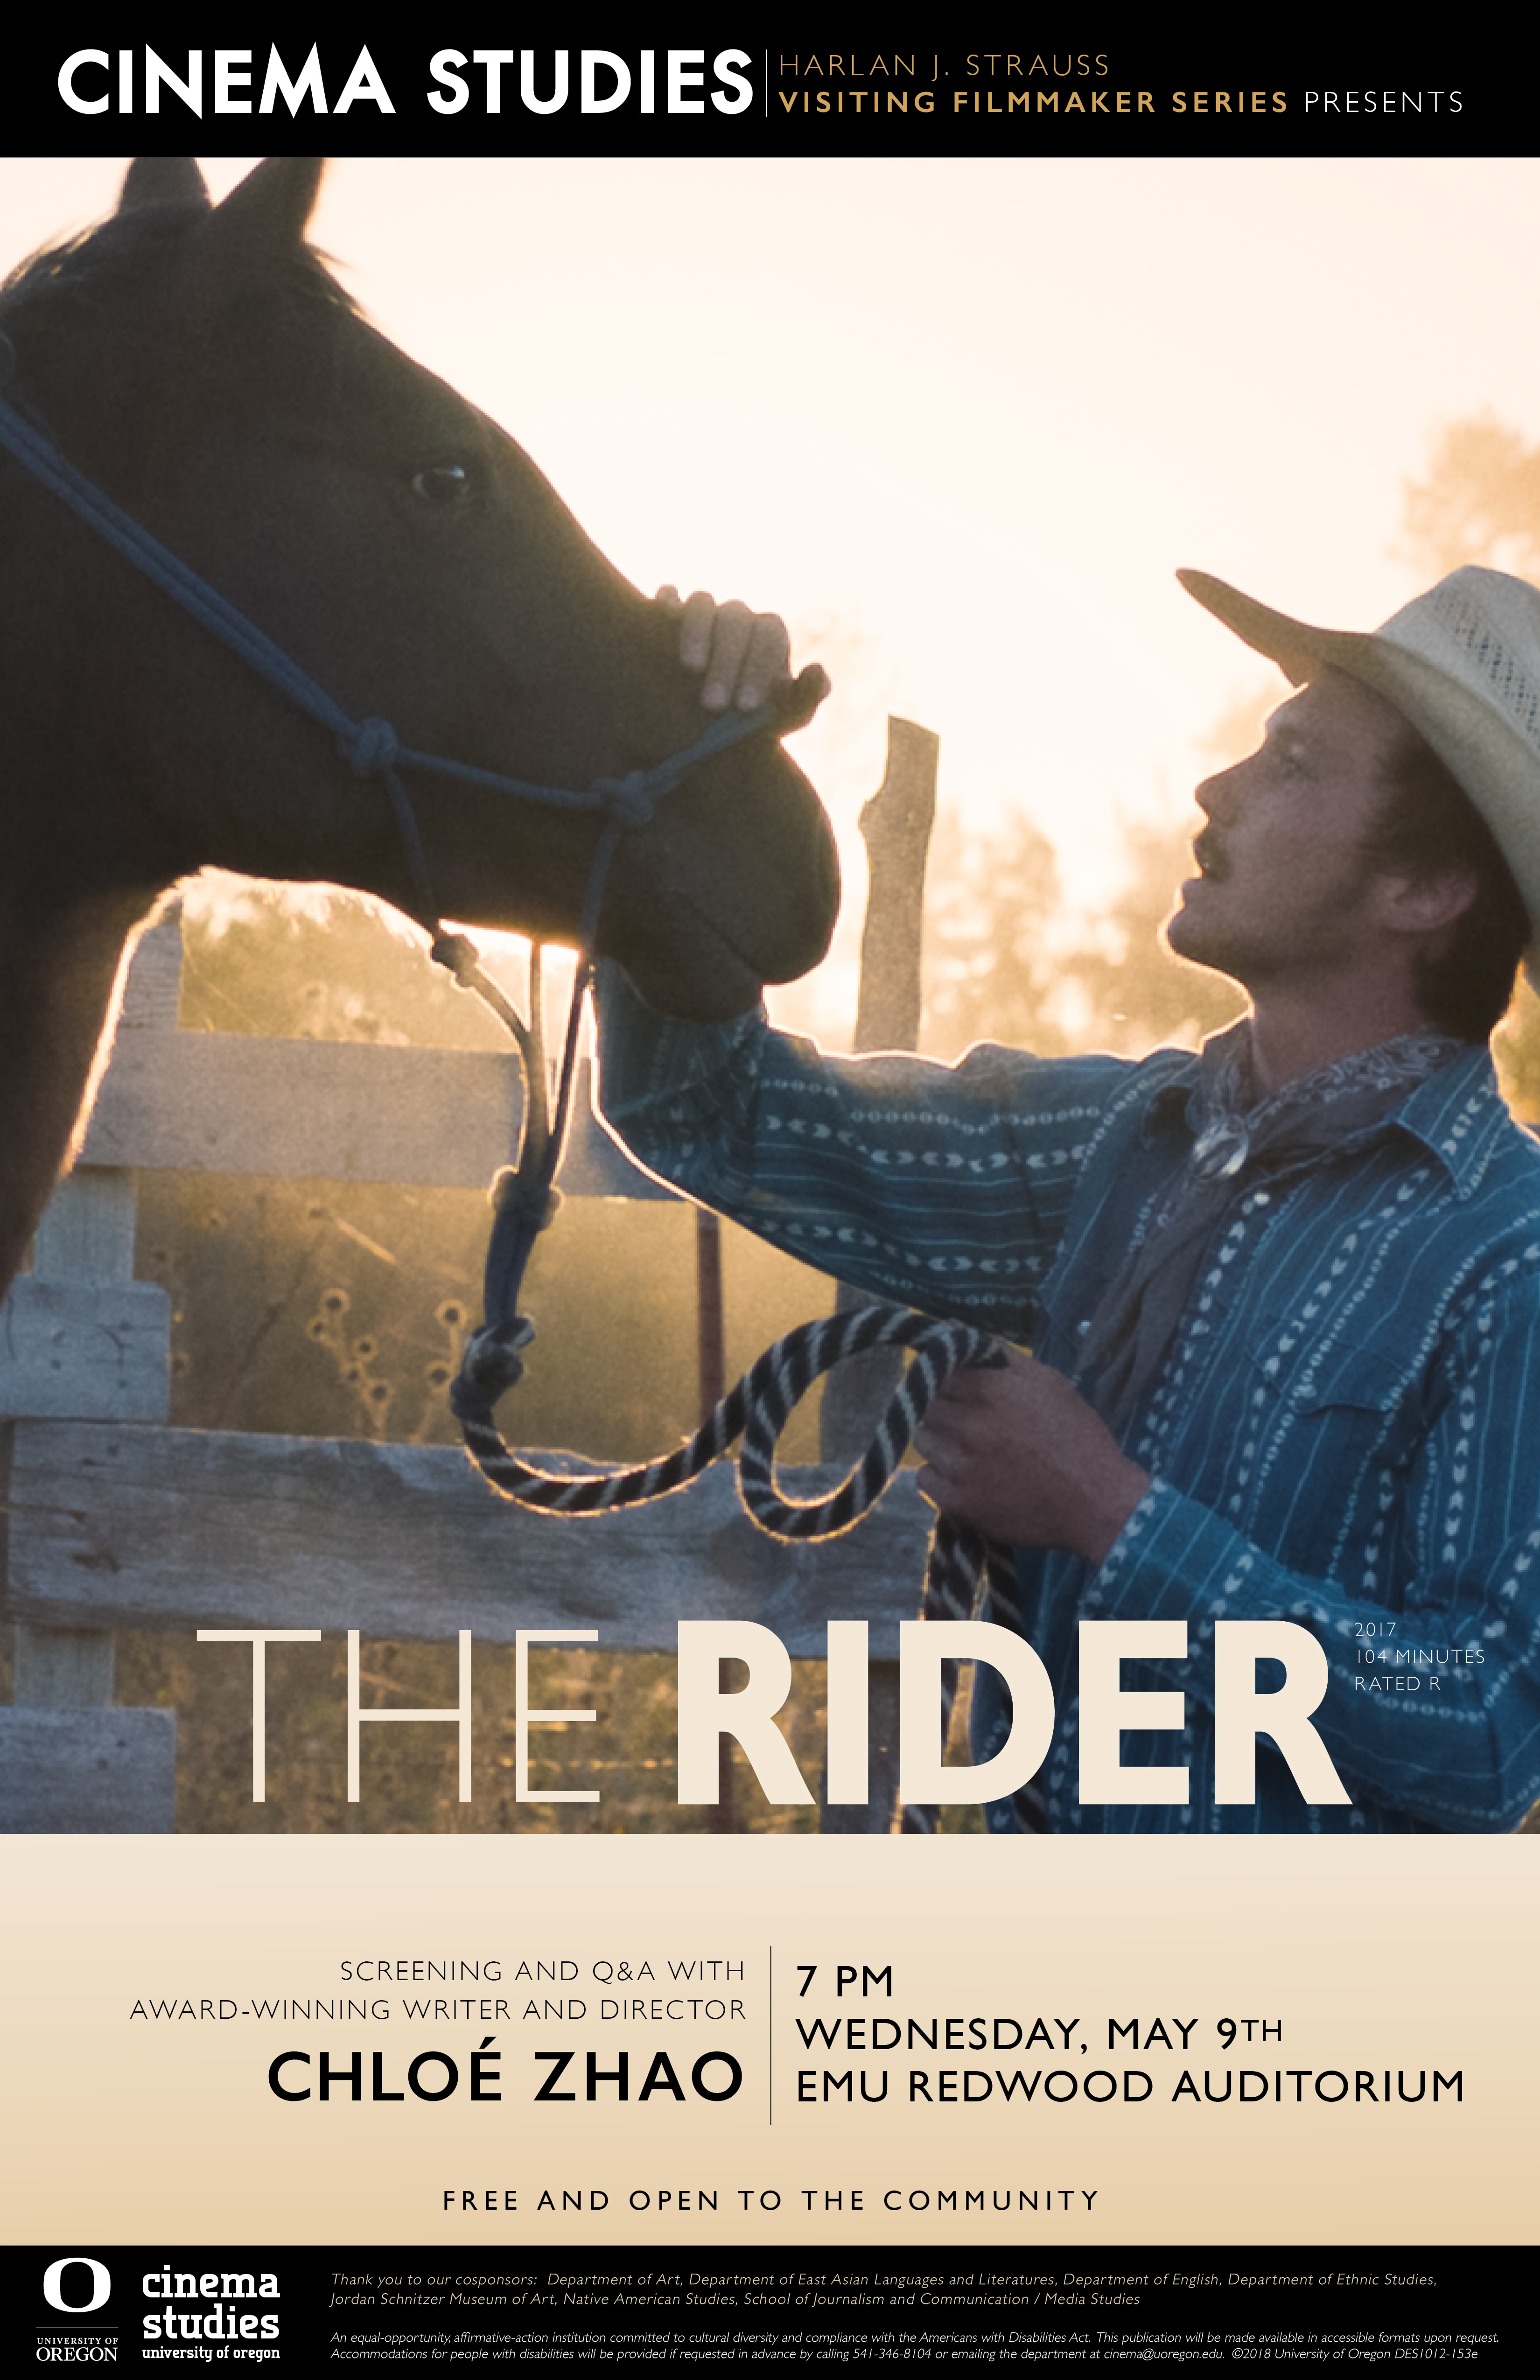  Screening of "The Rider" and Q&A with Director Chloé Zhao